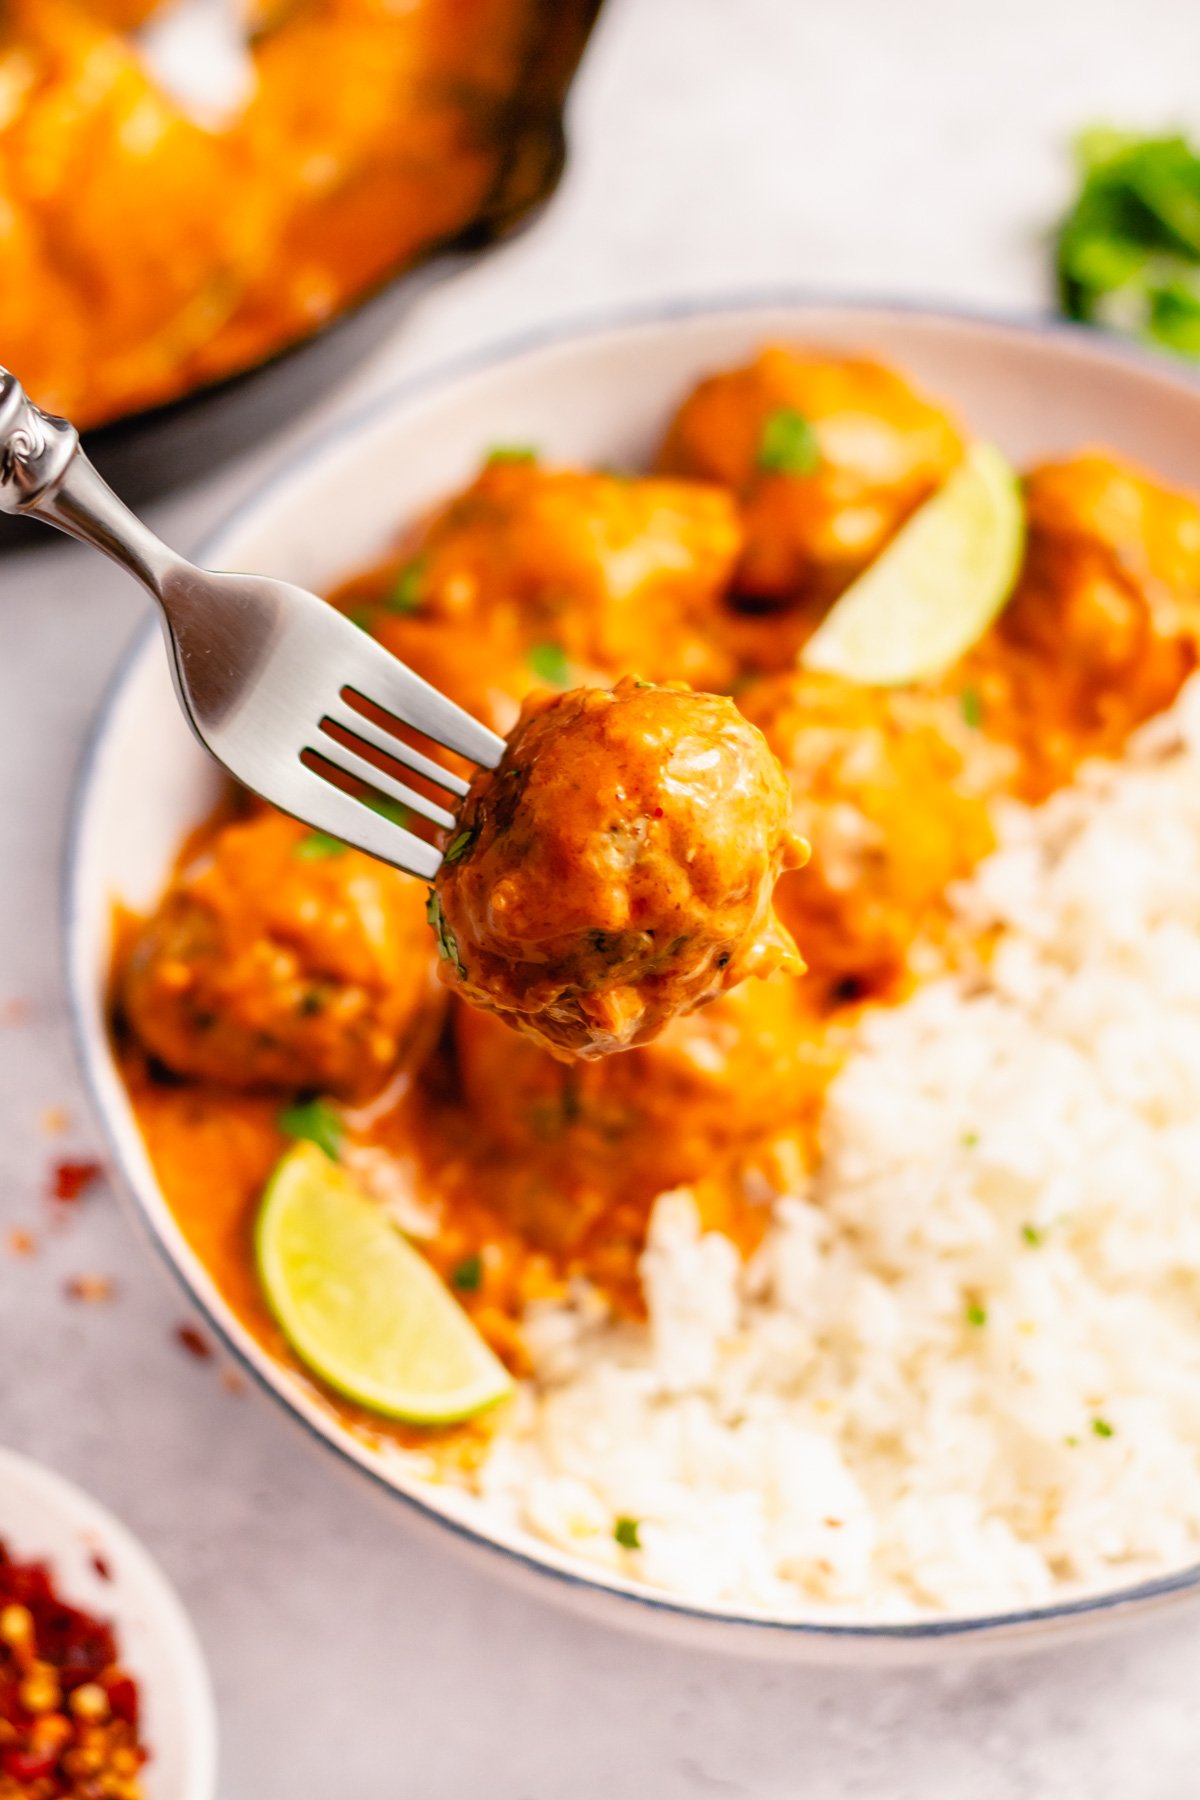 These Whole30 curry chicken meatballs are the perfect weeknight dinner recipe. Made on the stovetop, these gluten free ground chicken meatballs are dairy free, low carb and are done in one skillet. If you're looking for a dinner that is both healthy and delicious while keeping your cleanup to a minimum, give this curry chicken meatball recipe a go! #chickenmeatballs #glutenfreerecipes #dairyfreerecipes #whole30chicken